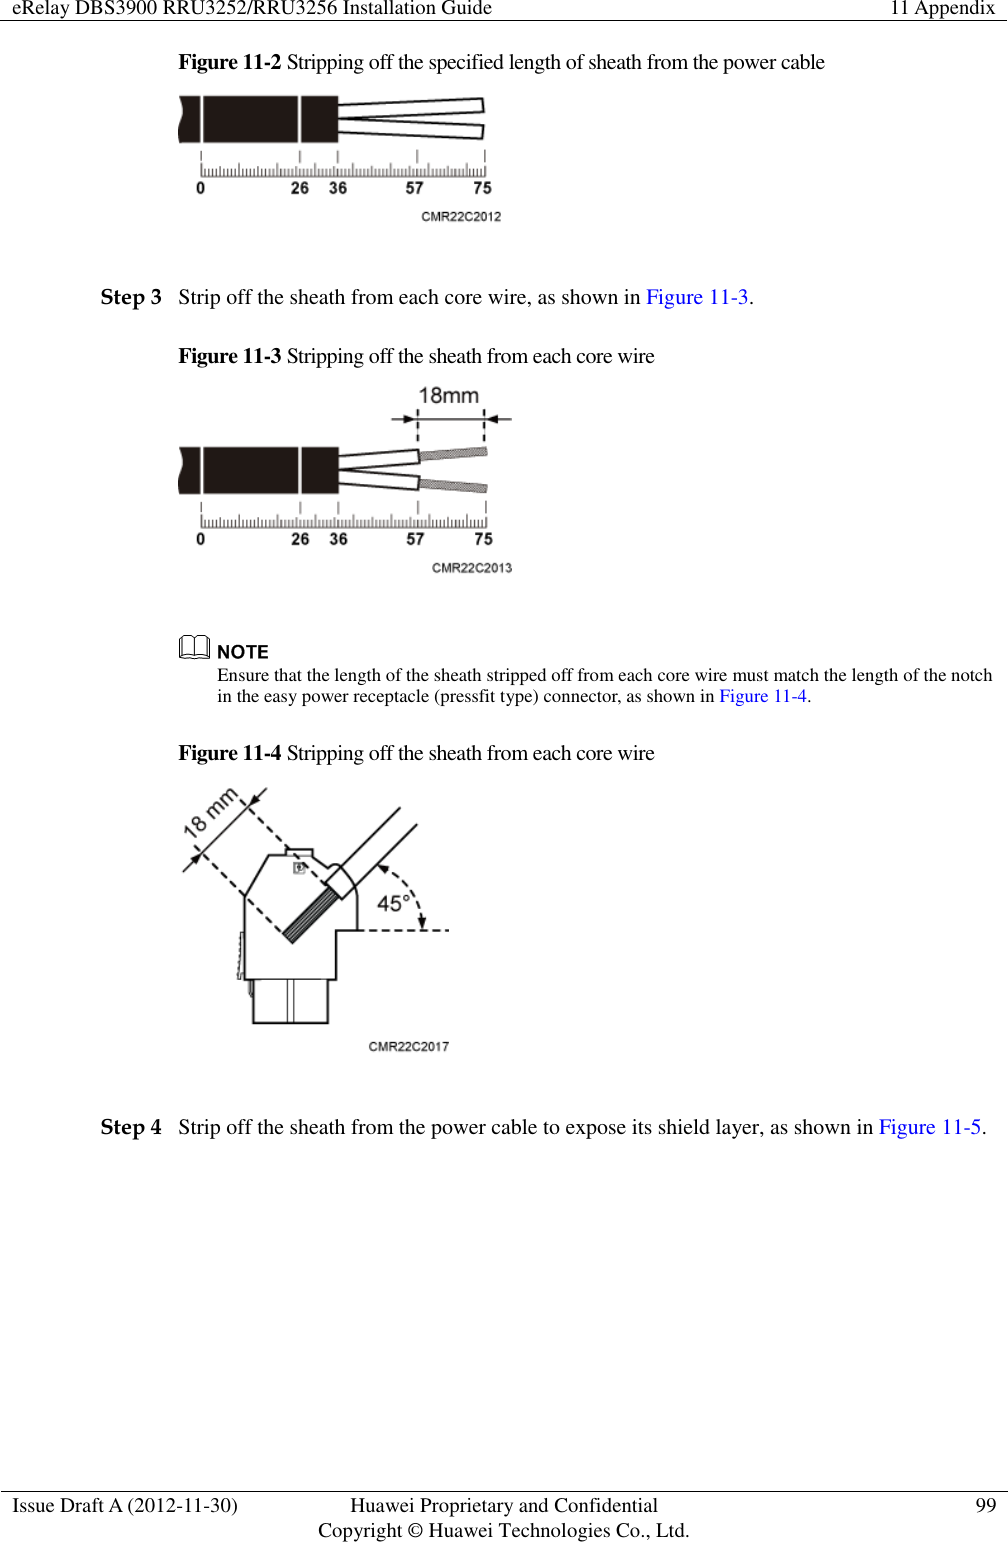 eRelay DBS3900 RRU3252/RRU3256 Installation Guide 11 Appendix  Issue Draft A (2012-11-30) Huawei Proprietary and Confidential                                     Copyright © Huawei Technologies Co., Ltd. 99  Figure 11-2 Stripping off the specified length of sheath from the power cable   Step 3 Strip off the sheath from each core wire, as shown in Figure 11-3.   Figure 11-3 Stripping off the sheath from each core wire    Ensure that the length of the sheath stripped off from each core wire must match the length of the notch in the easy power receptacle (pressfit type) connector, as shown in Figure 11-4.   Figure 11-4 Stripping off the sheath from each core wire   Step 4 Strip off the sheath from the power cable to expose its shield layer, as shown in Figure 11-5.   